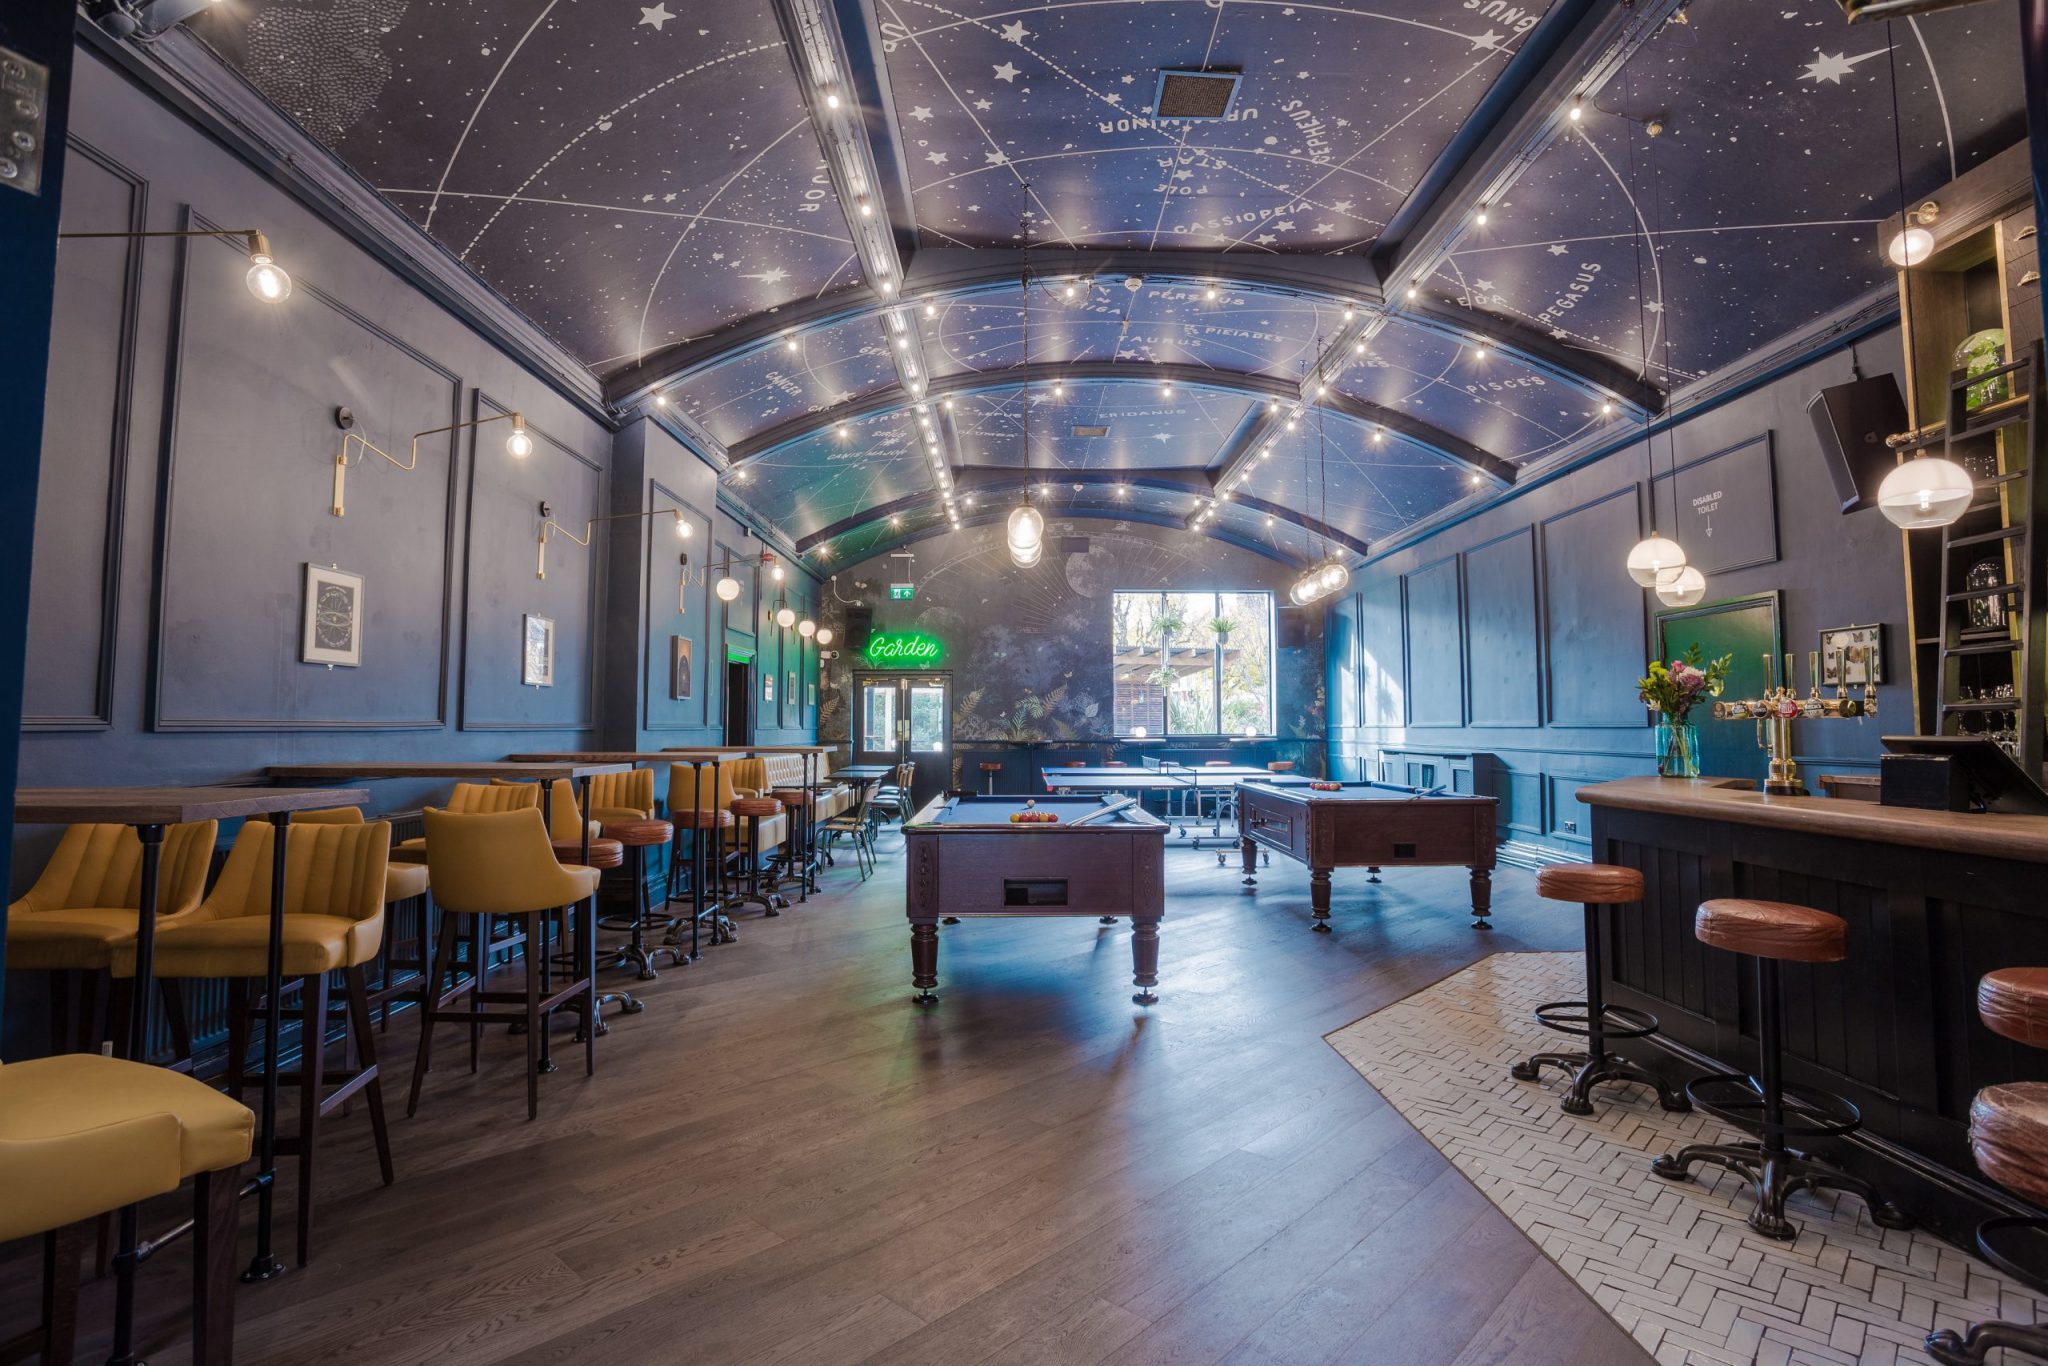 Our function room with Pool Tables and Ping Pong Tables.